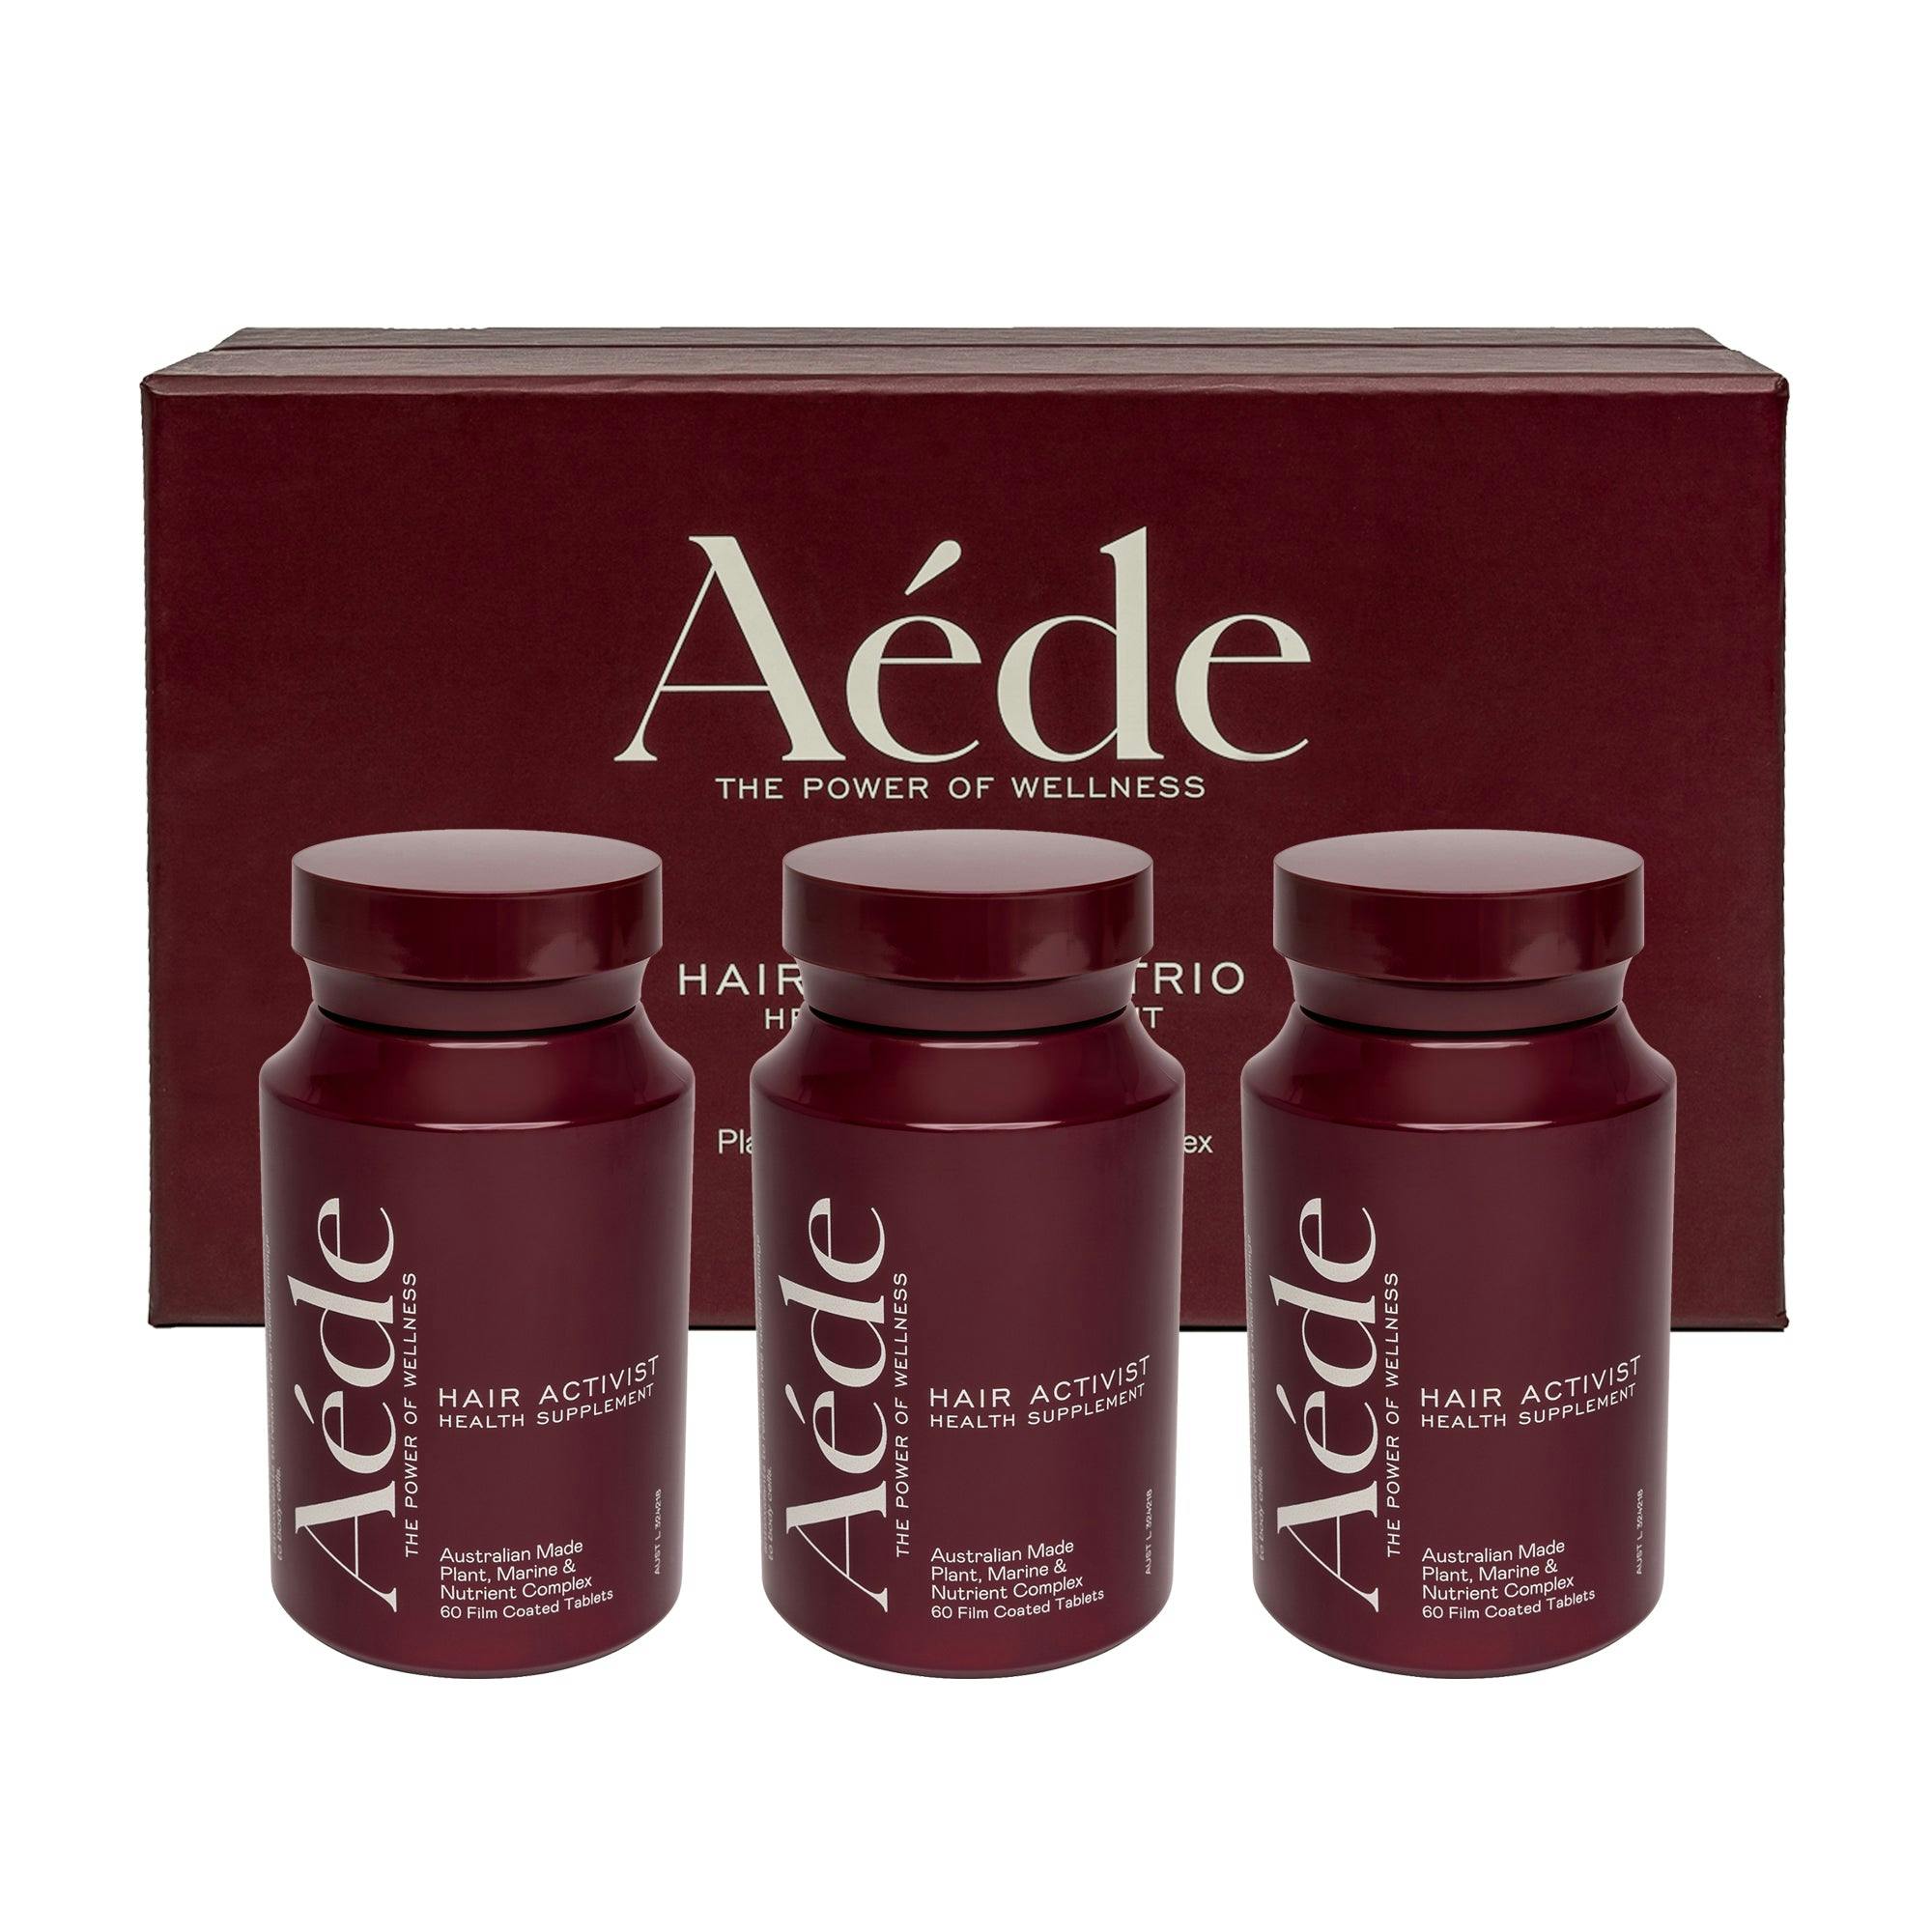 Aéde Hair Activists Health Supplements 180 Tablets - 3 Month Supply